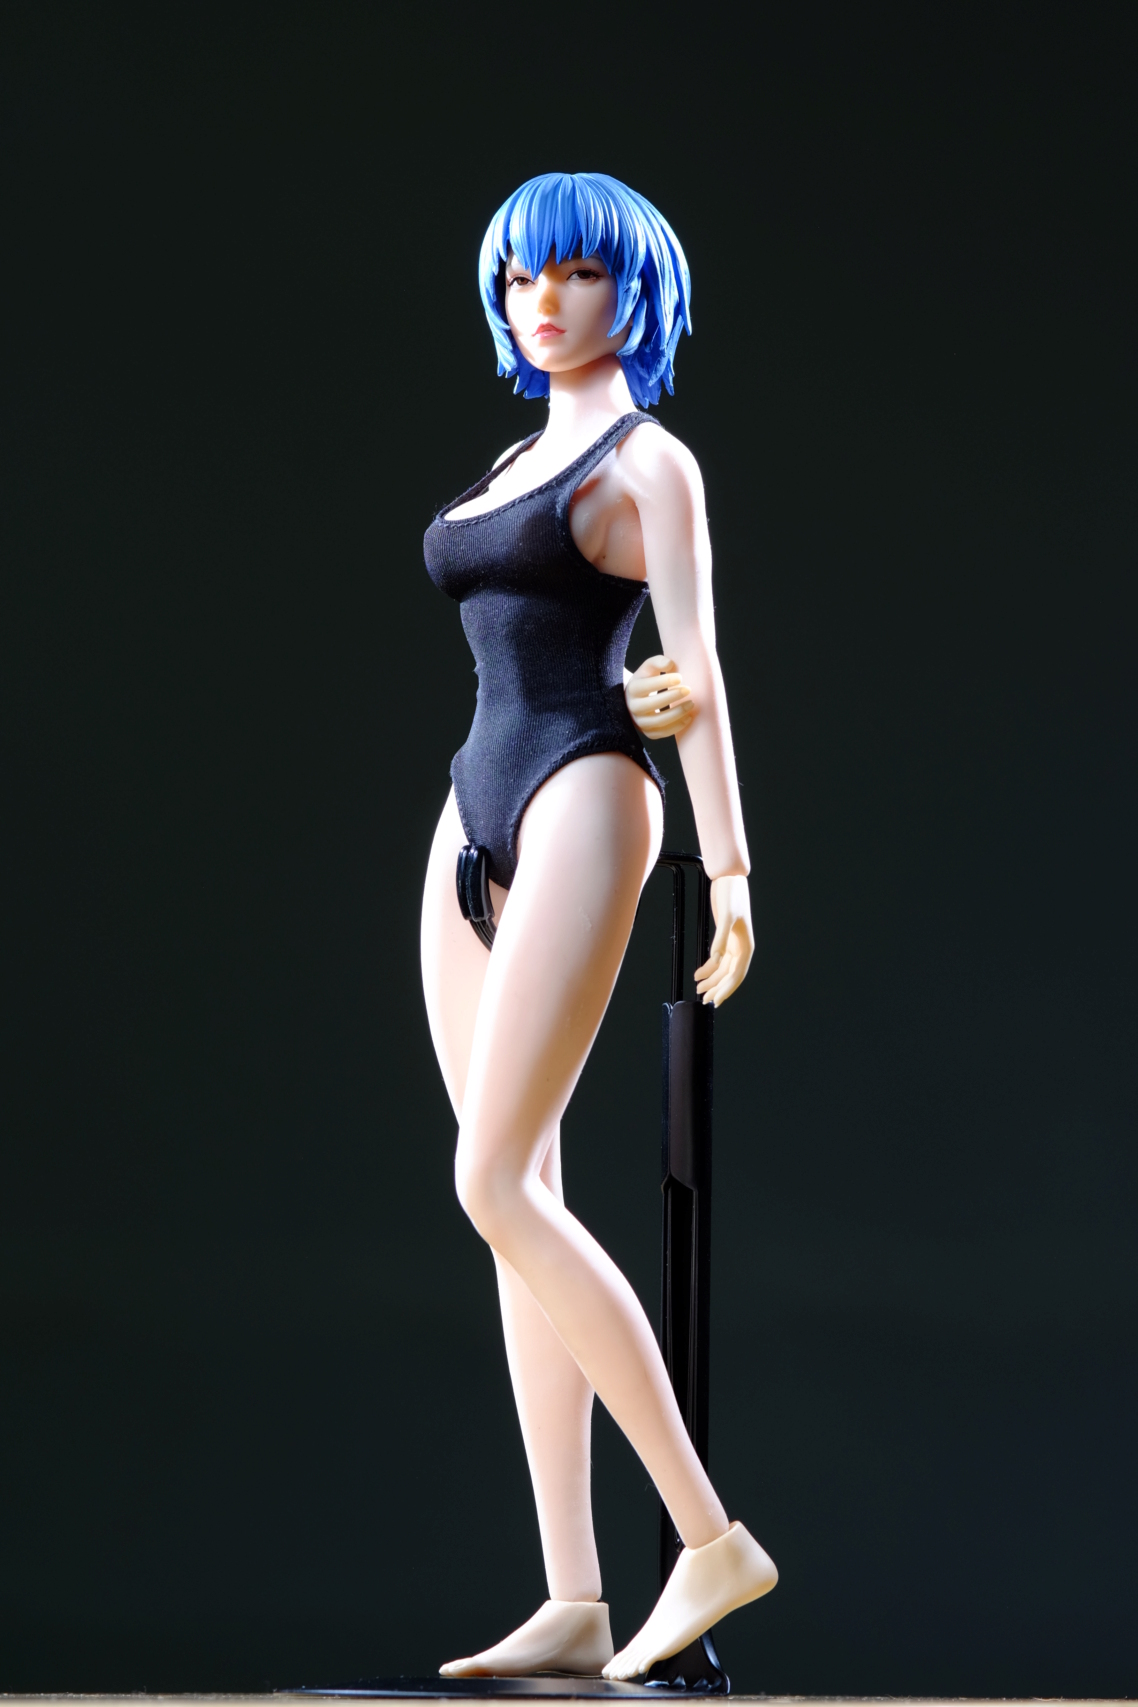 AyanamiRei - NEW PRODUCT: VSToys: 1/6 Ayanami Rei student outfit & head sculpt set Fuji0911